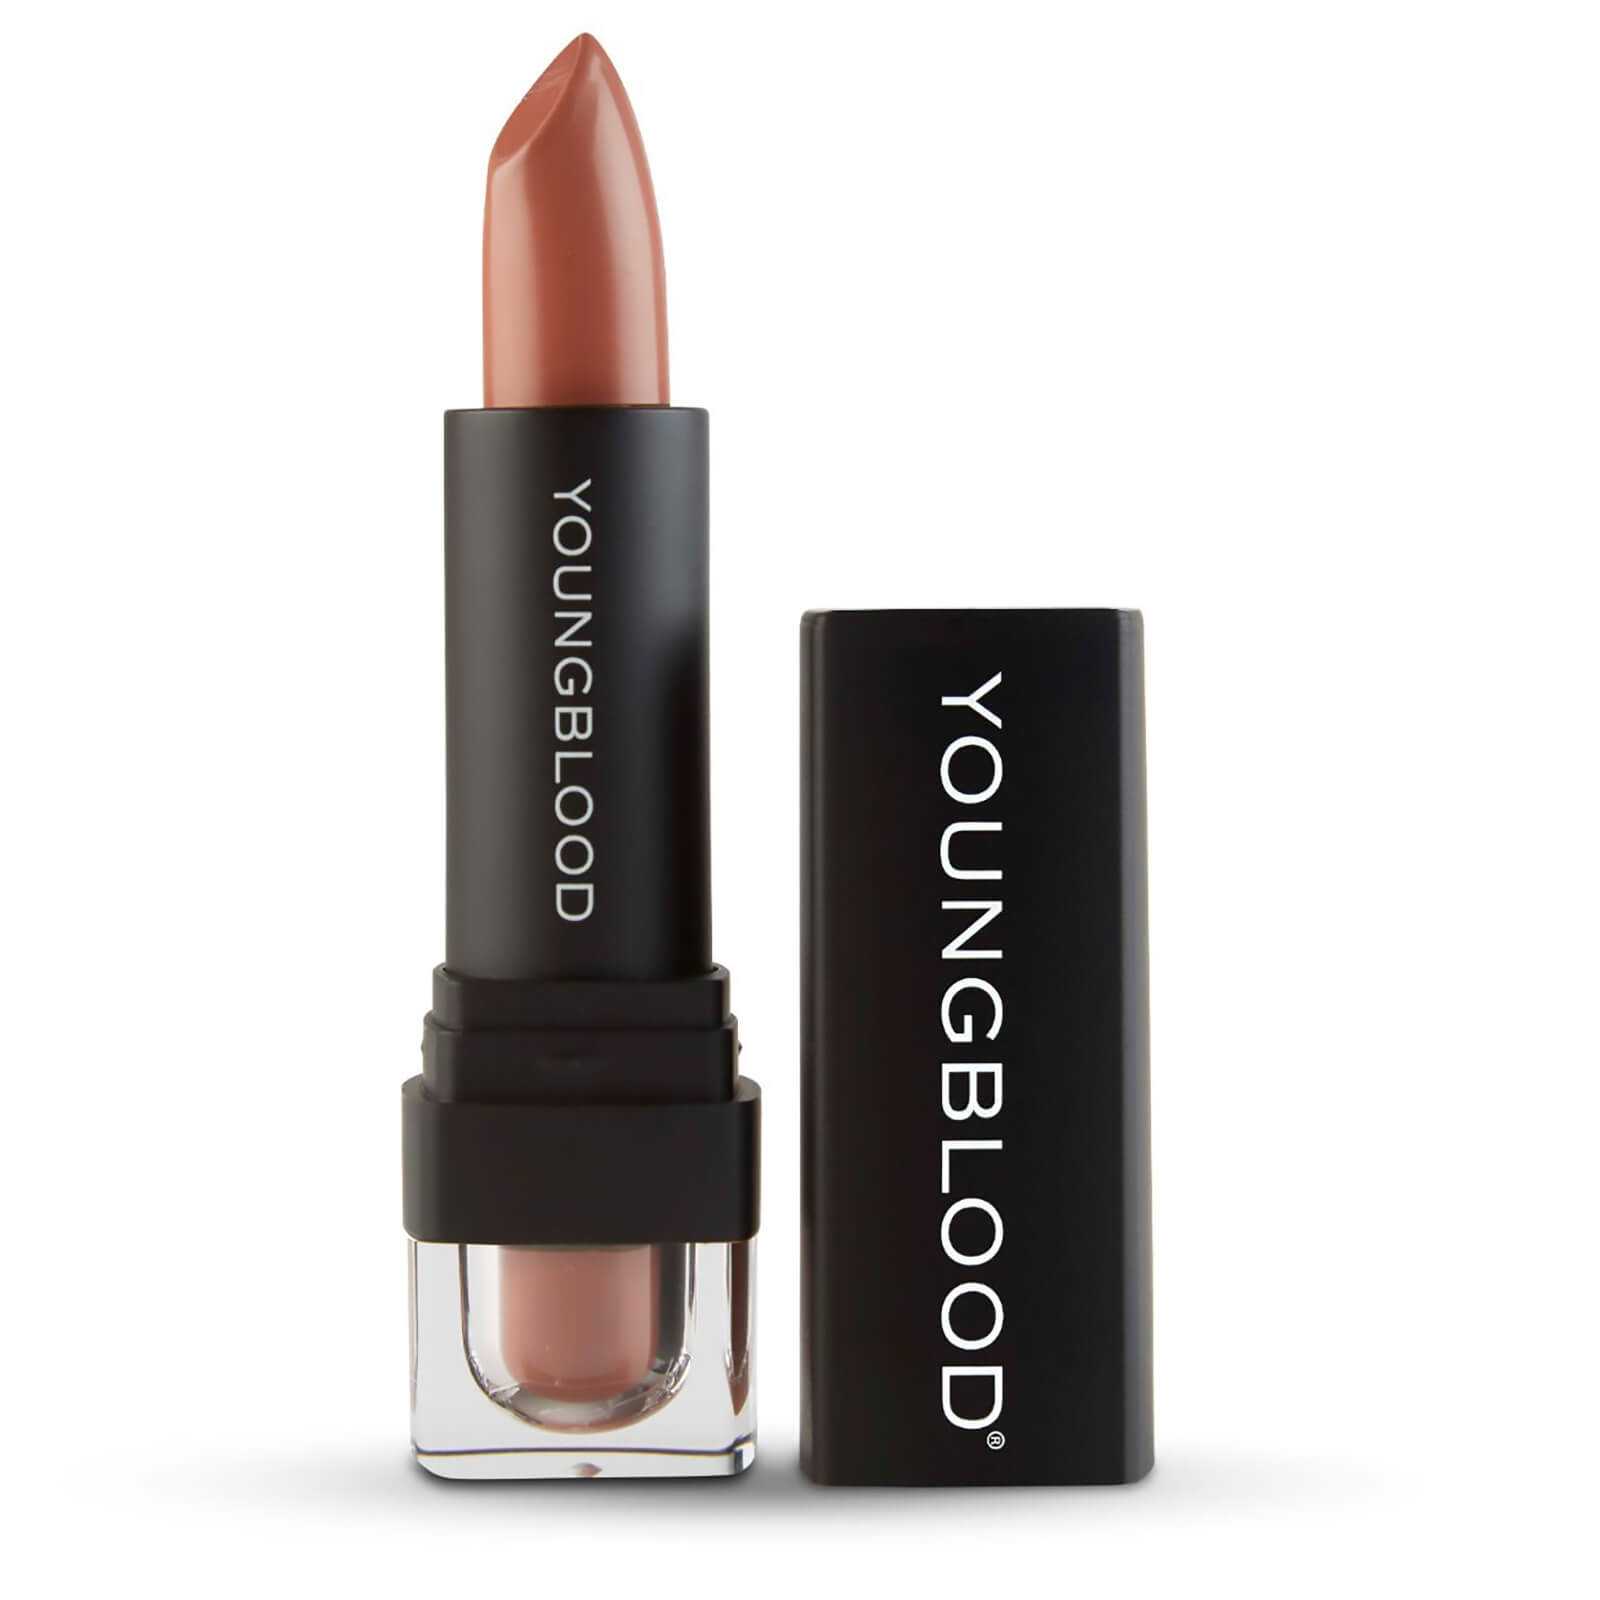 Youngblood Mineral Cosmetics Youngblood Mineral Crème Lipstick 4g (Various Shades) - Muse